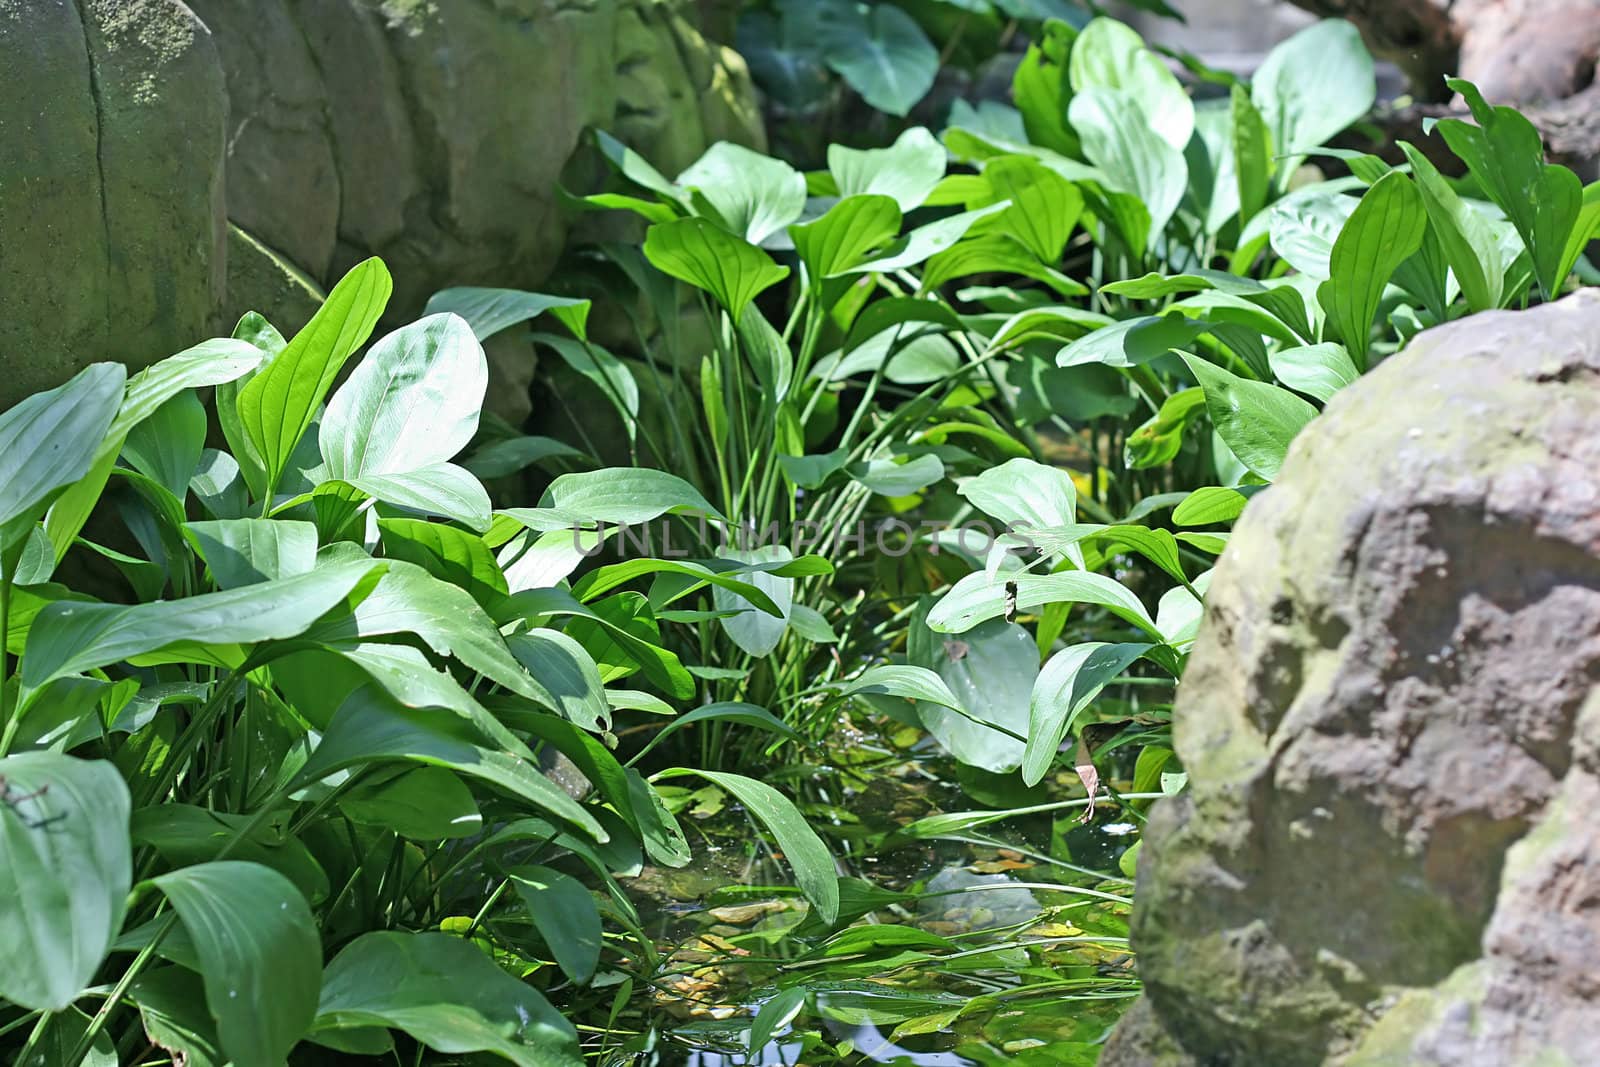 A Still Pond in a Tropical Climate